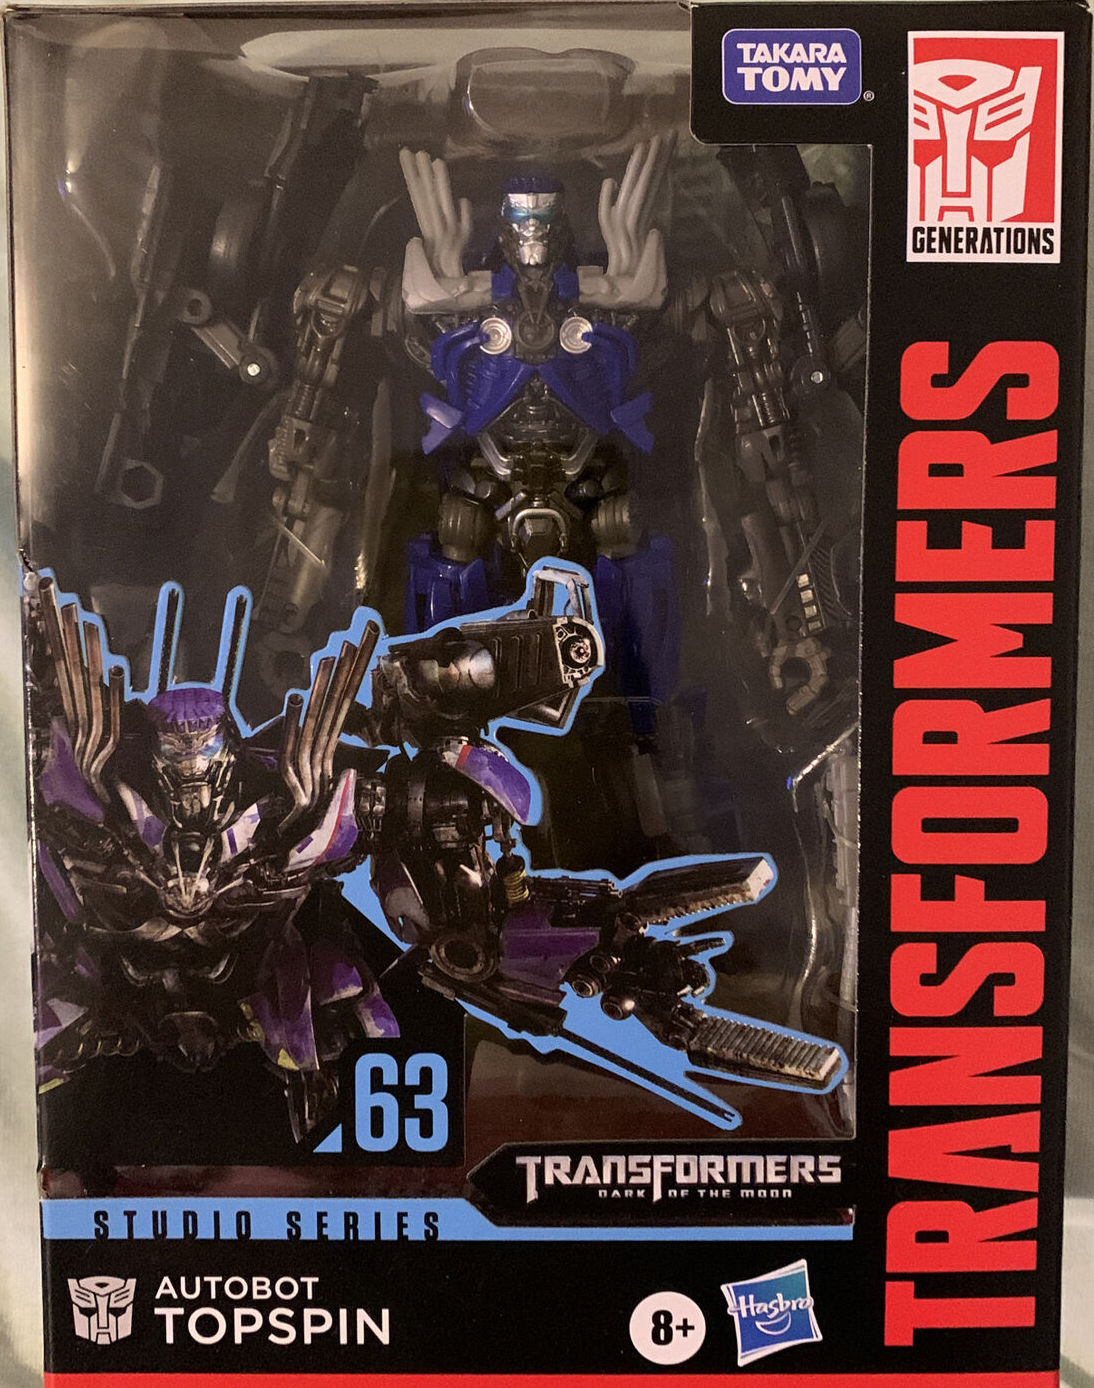 Transformers Studio Series SS63 Topspin Toy Action Figure Figurine New in Box 